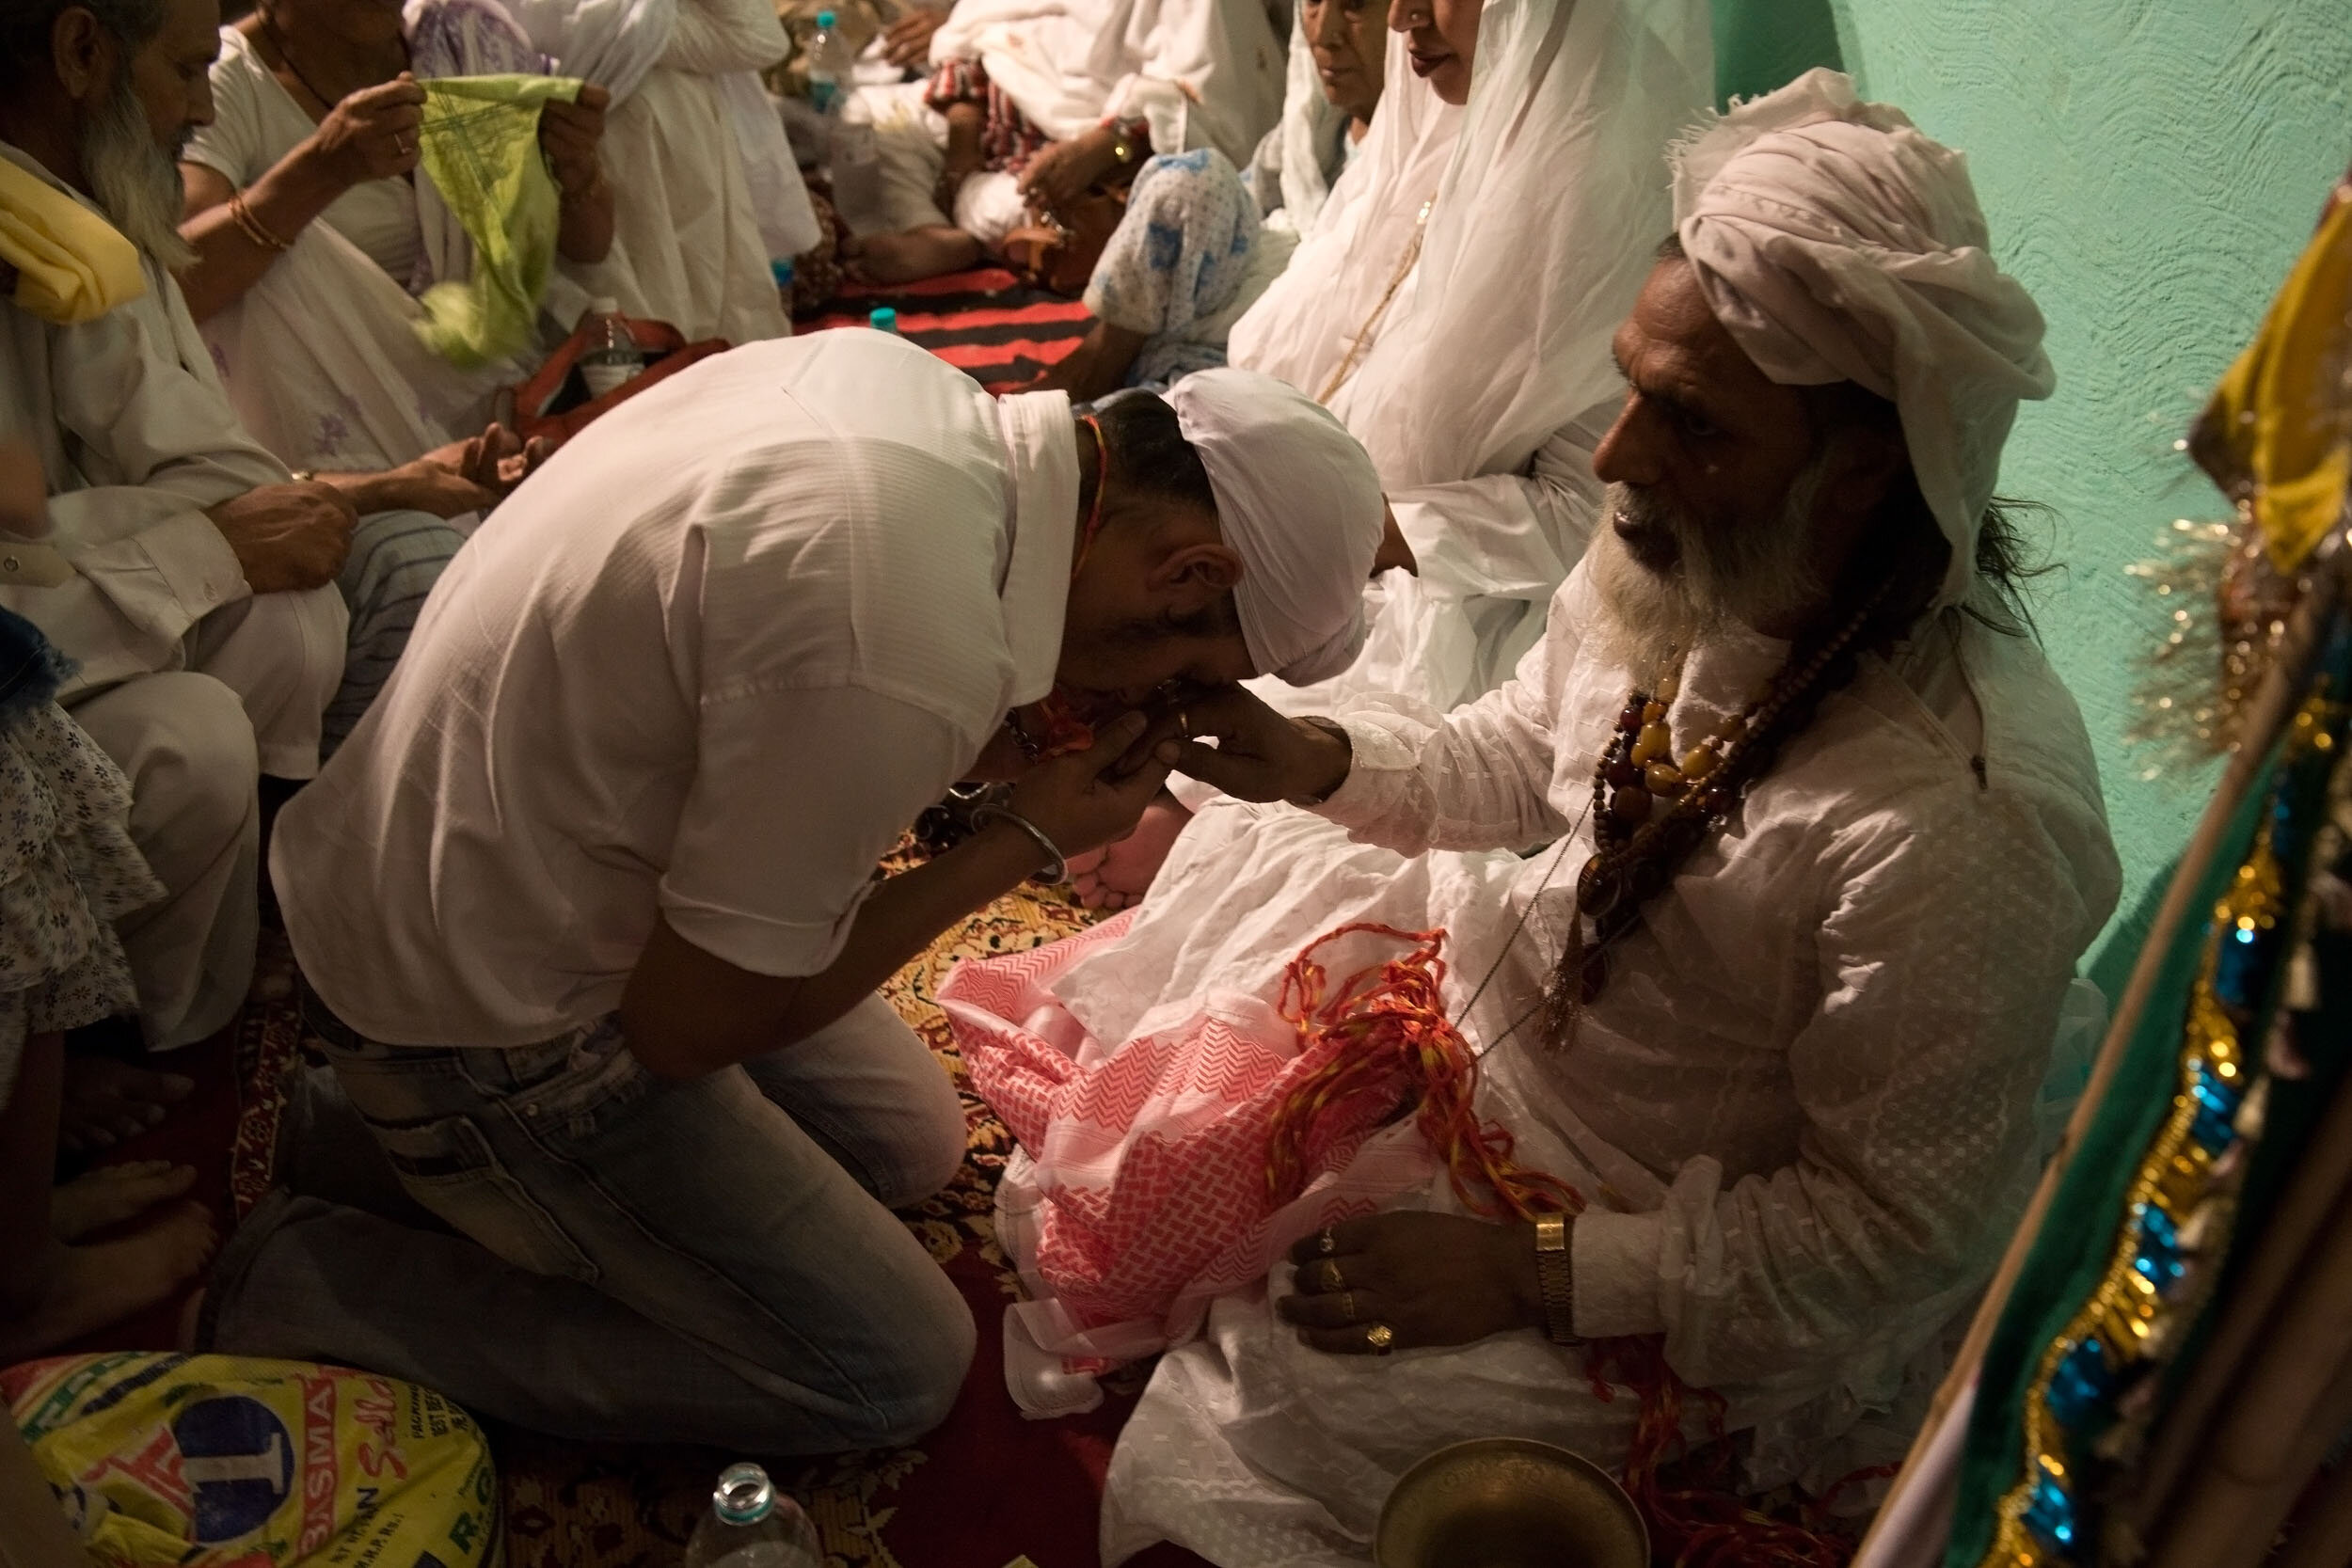  Young Sikh paying his respect to a Sufi  Baba , Delhi, May 28/2010. 